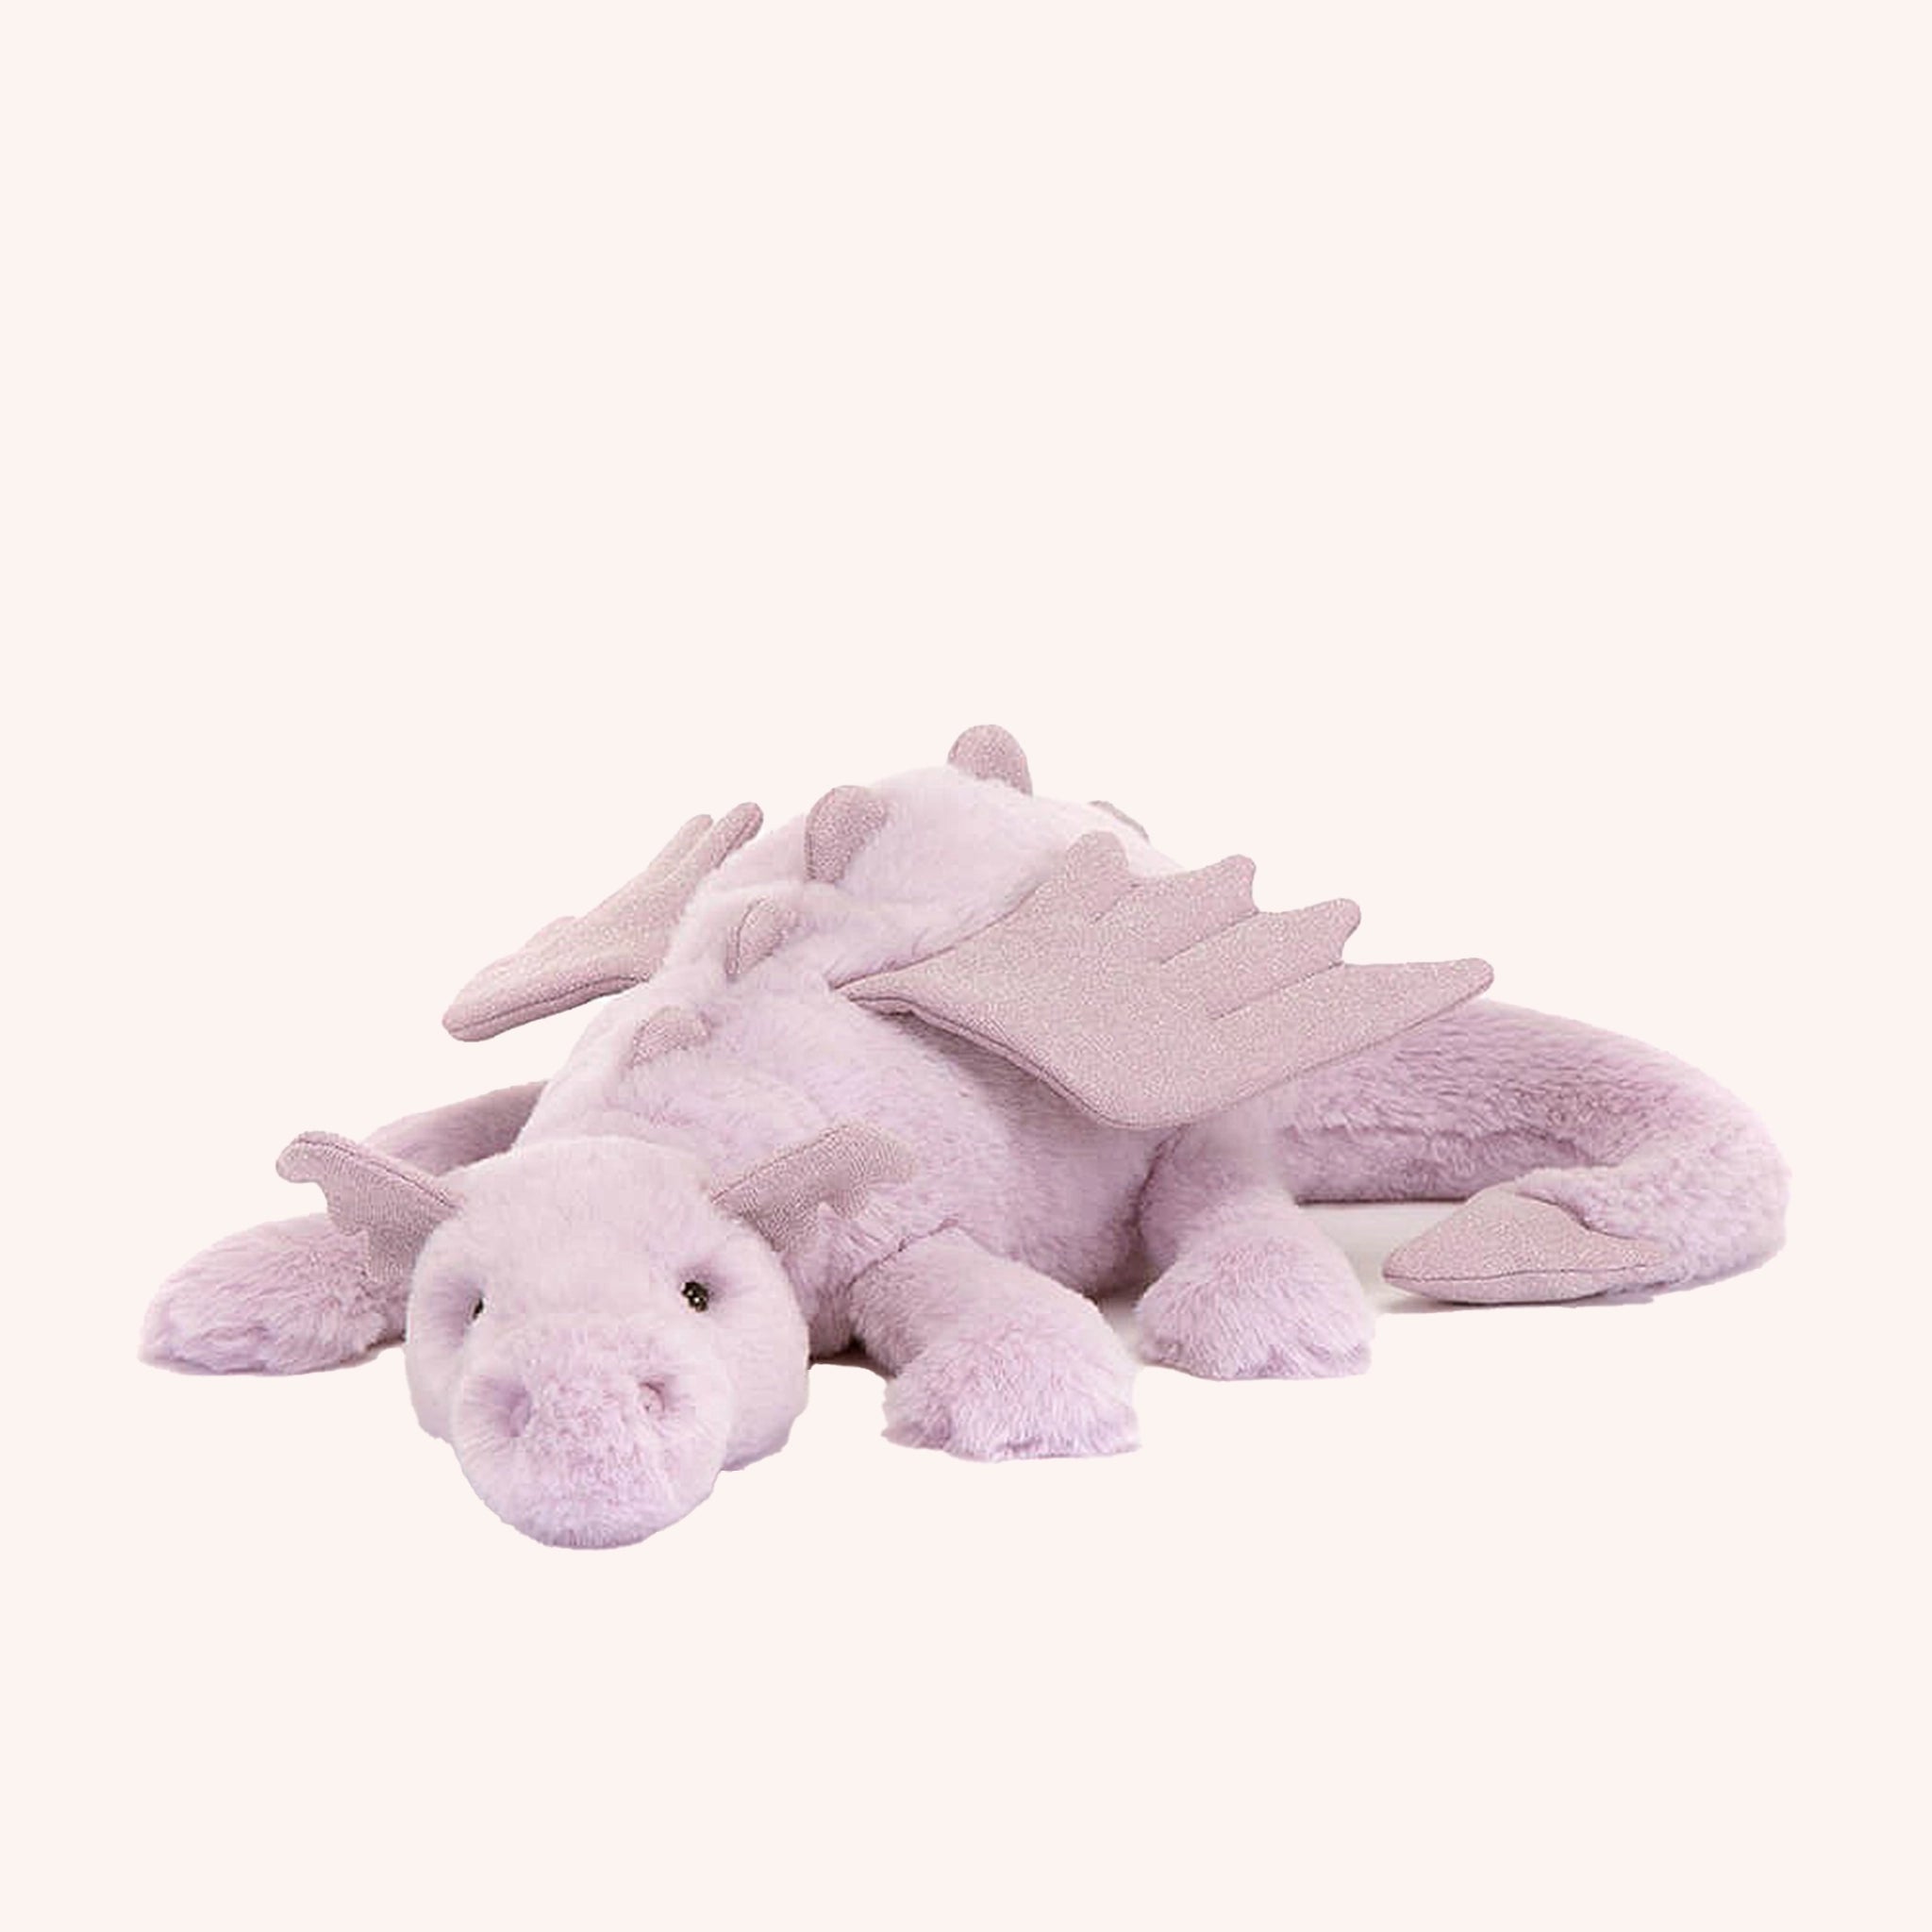 On a white background is a light purple dragon stuffed animal with wings, a sweet face and a long tail.